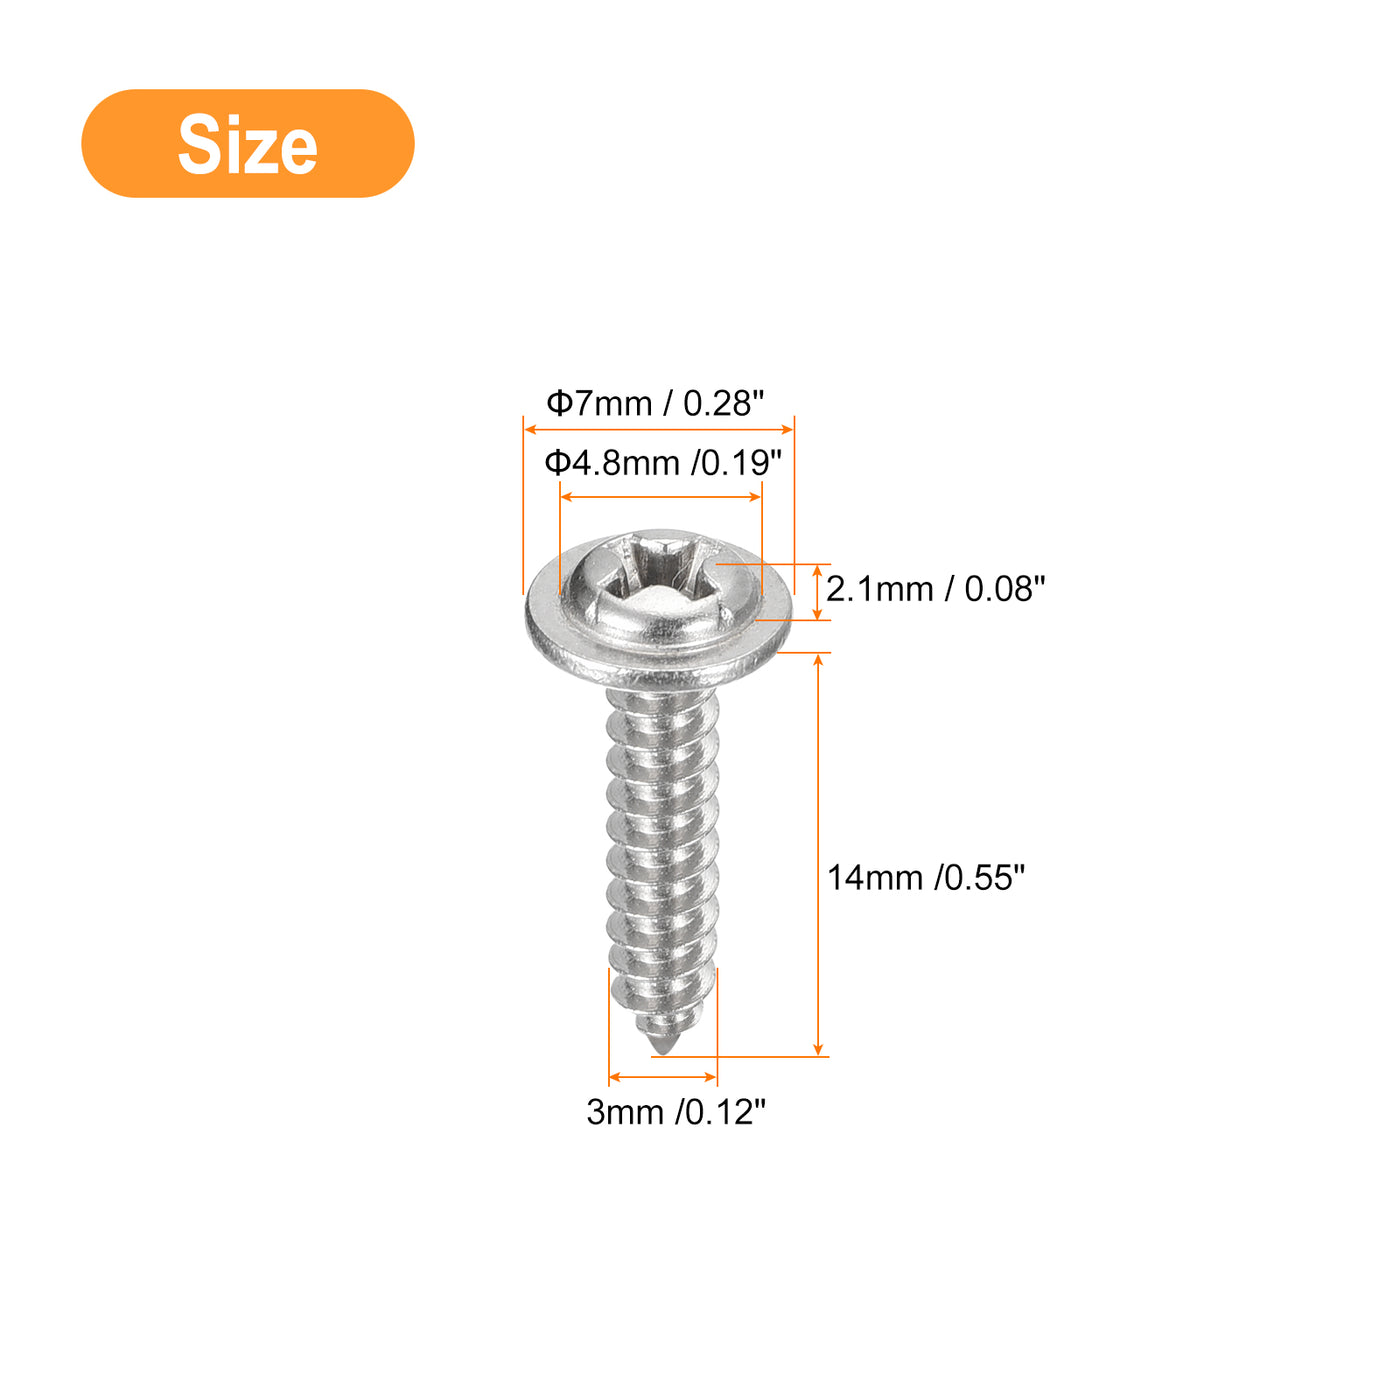 uxcell Uxcell ST3x14mm Phillips Pan Head Self-tapping Screw with Washer, 100pcs - 304 Stainless Steel Wood Screw Full Thread (Silver)